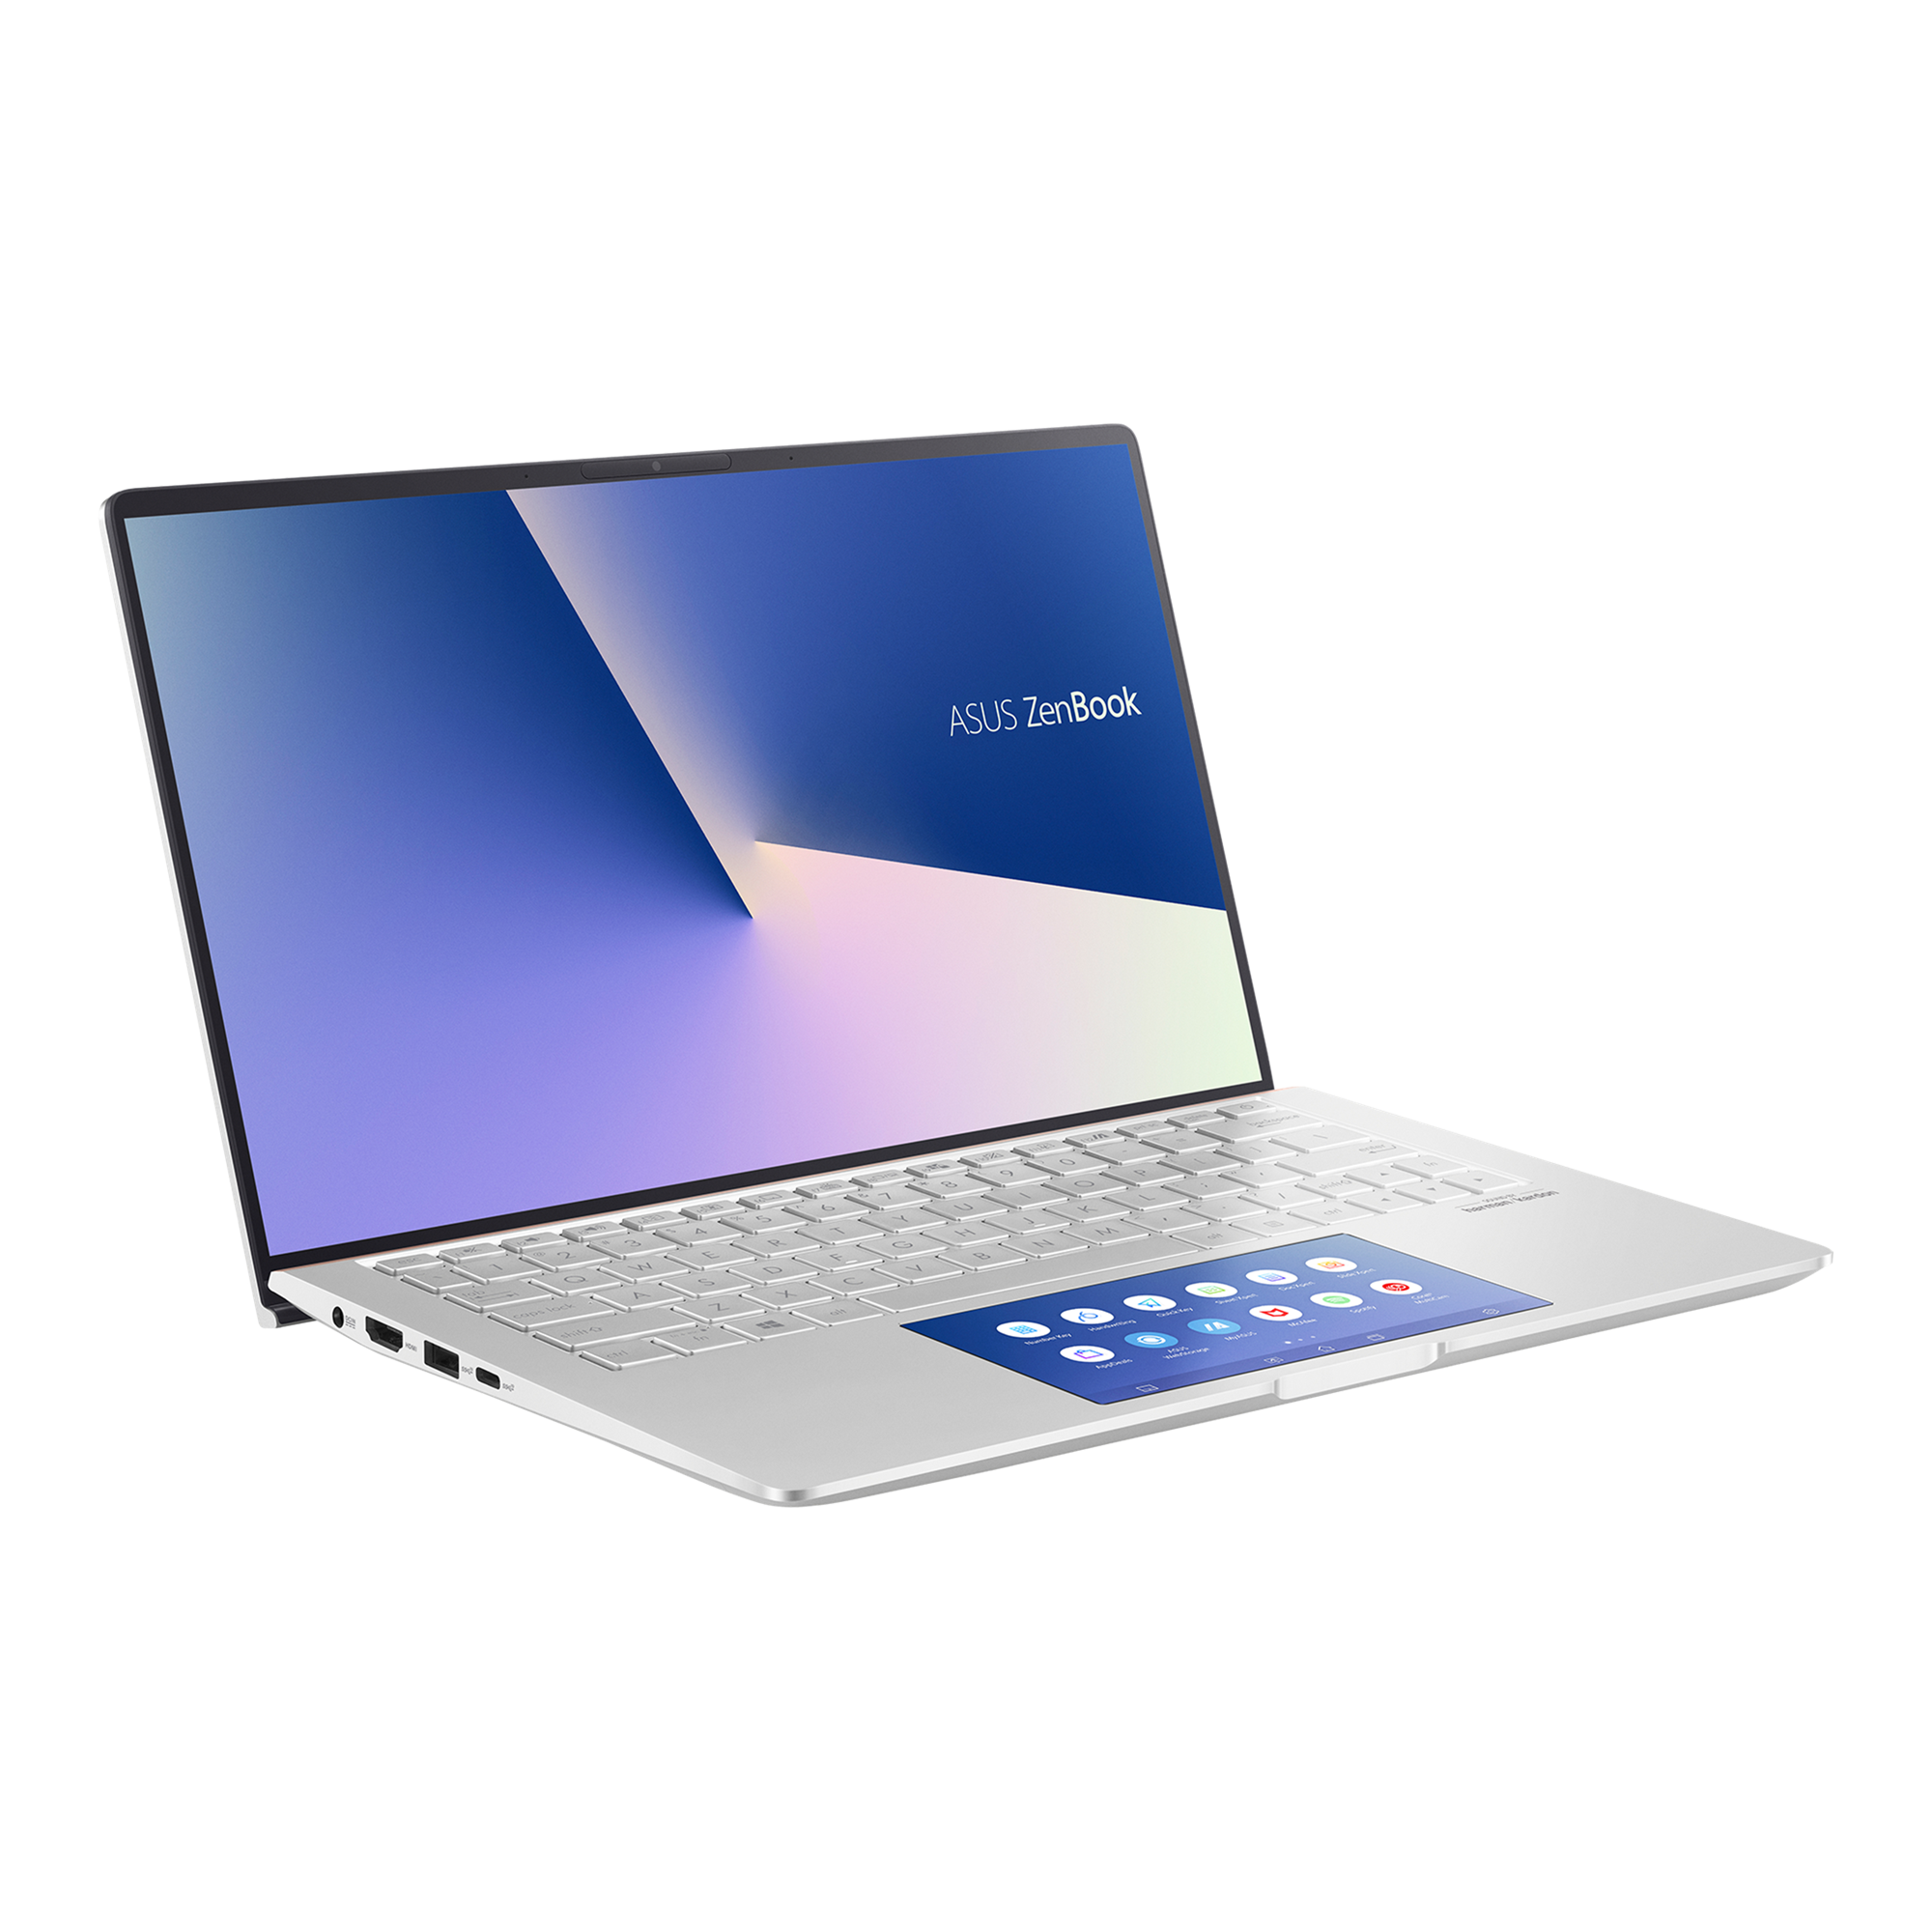 ASUS Zenbook 13 UX334｜Laptops For Home｜ASUS USA